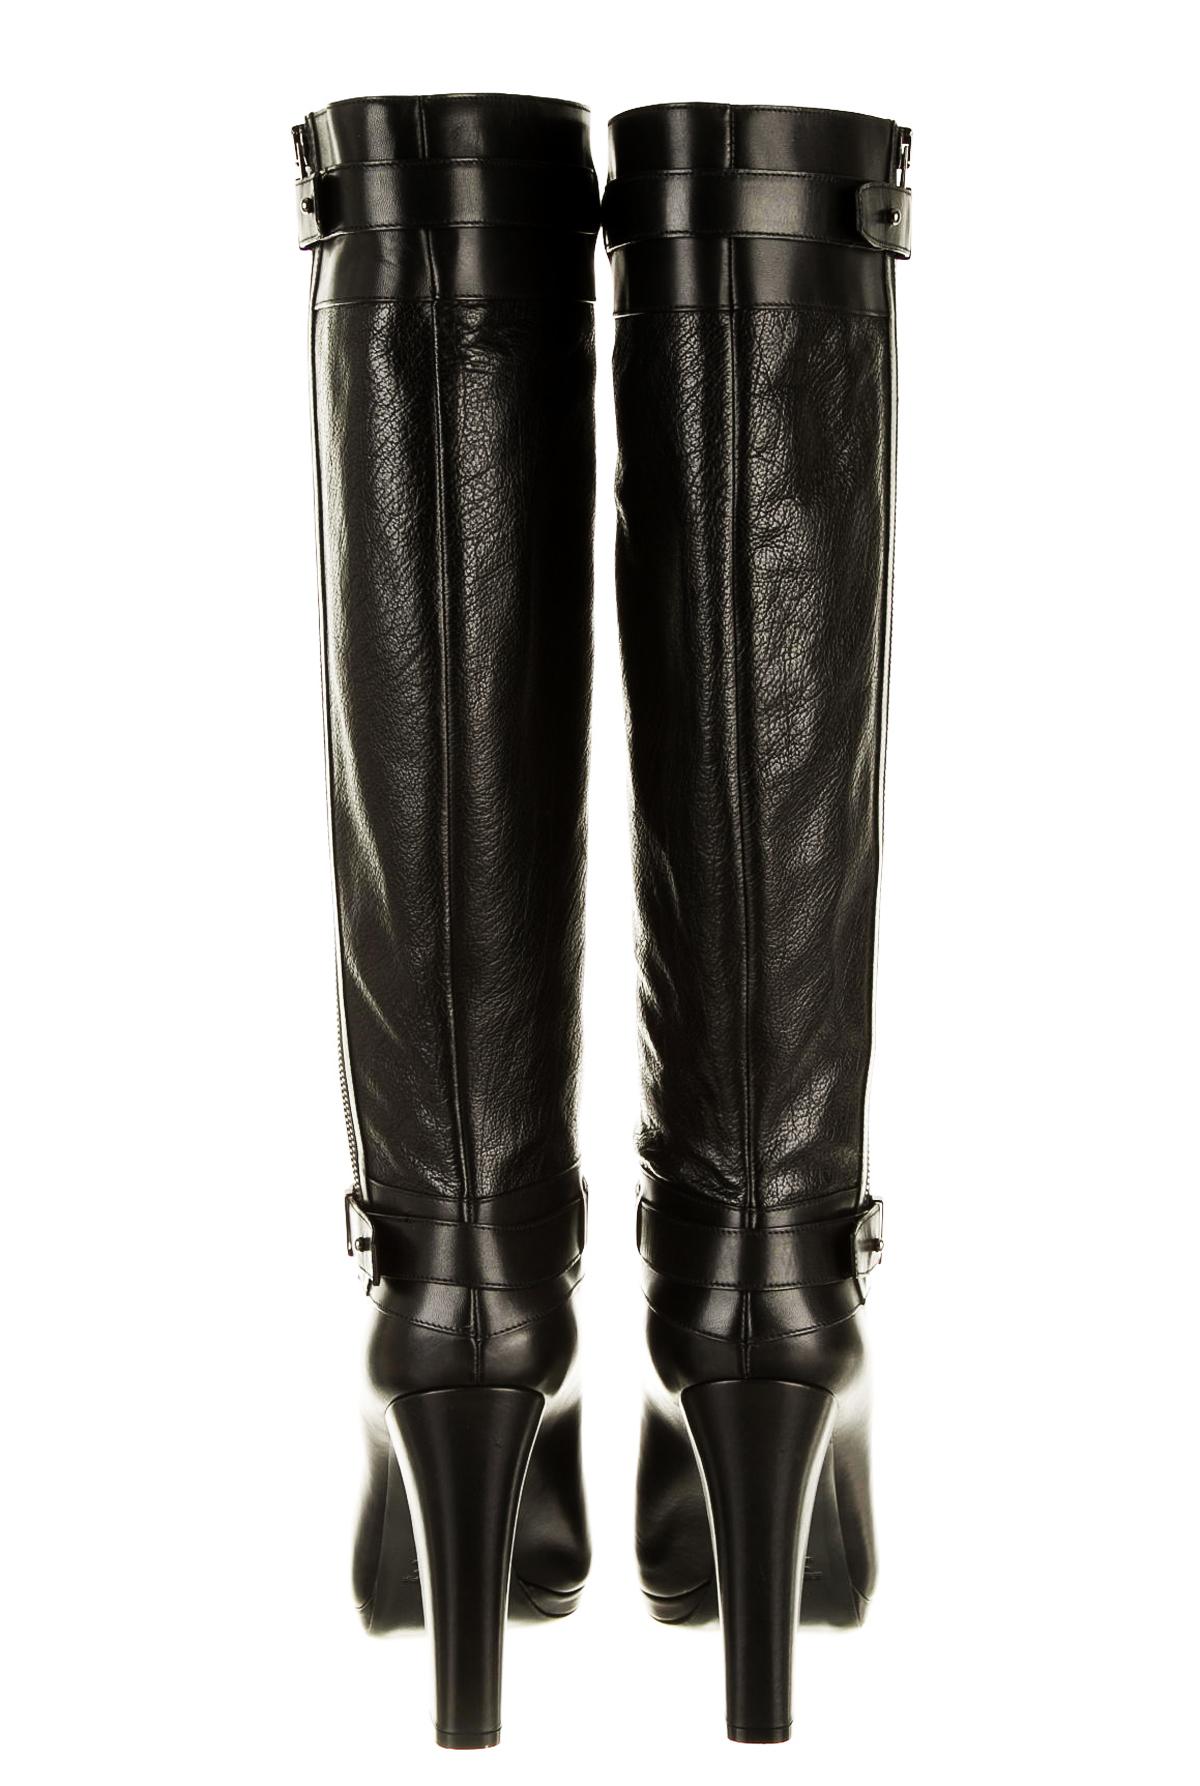 New Belstaff Runway  GAINSBOROUGH Leather Black Knee-High Boots 39.5 - US 9.5 In New Condition For Sale In Montgomery, TX